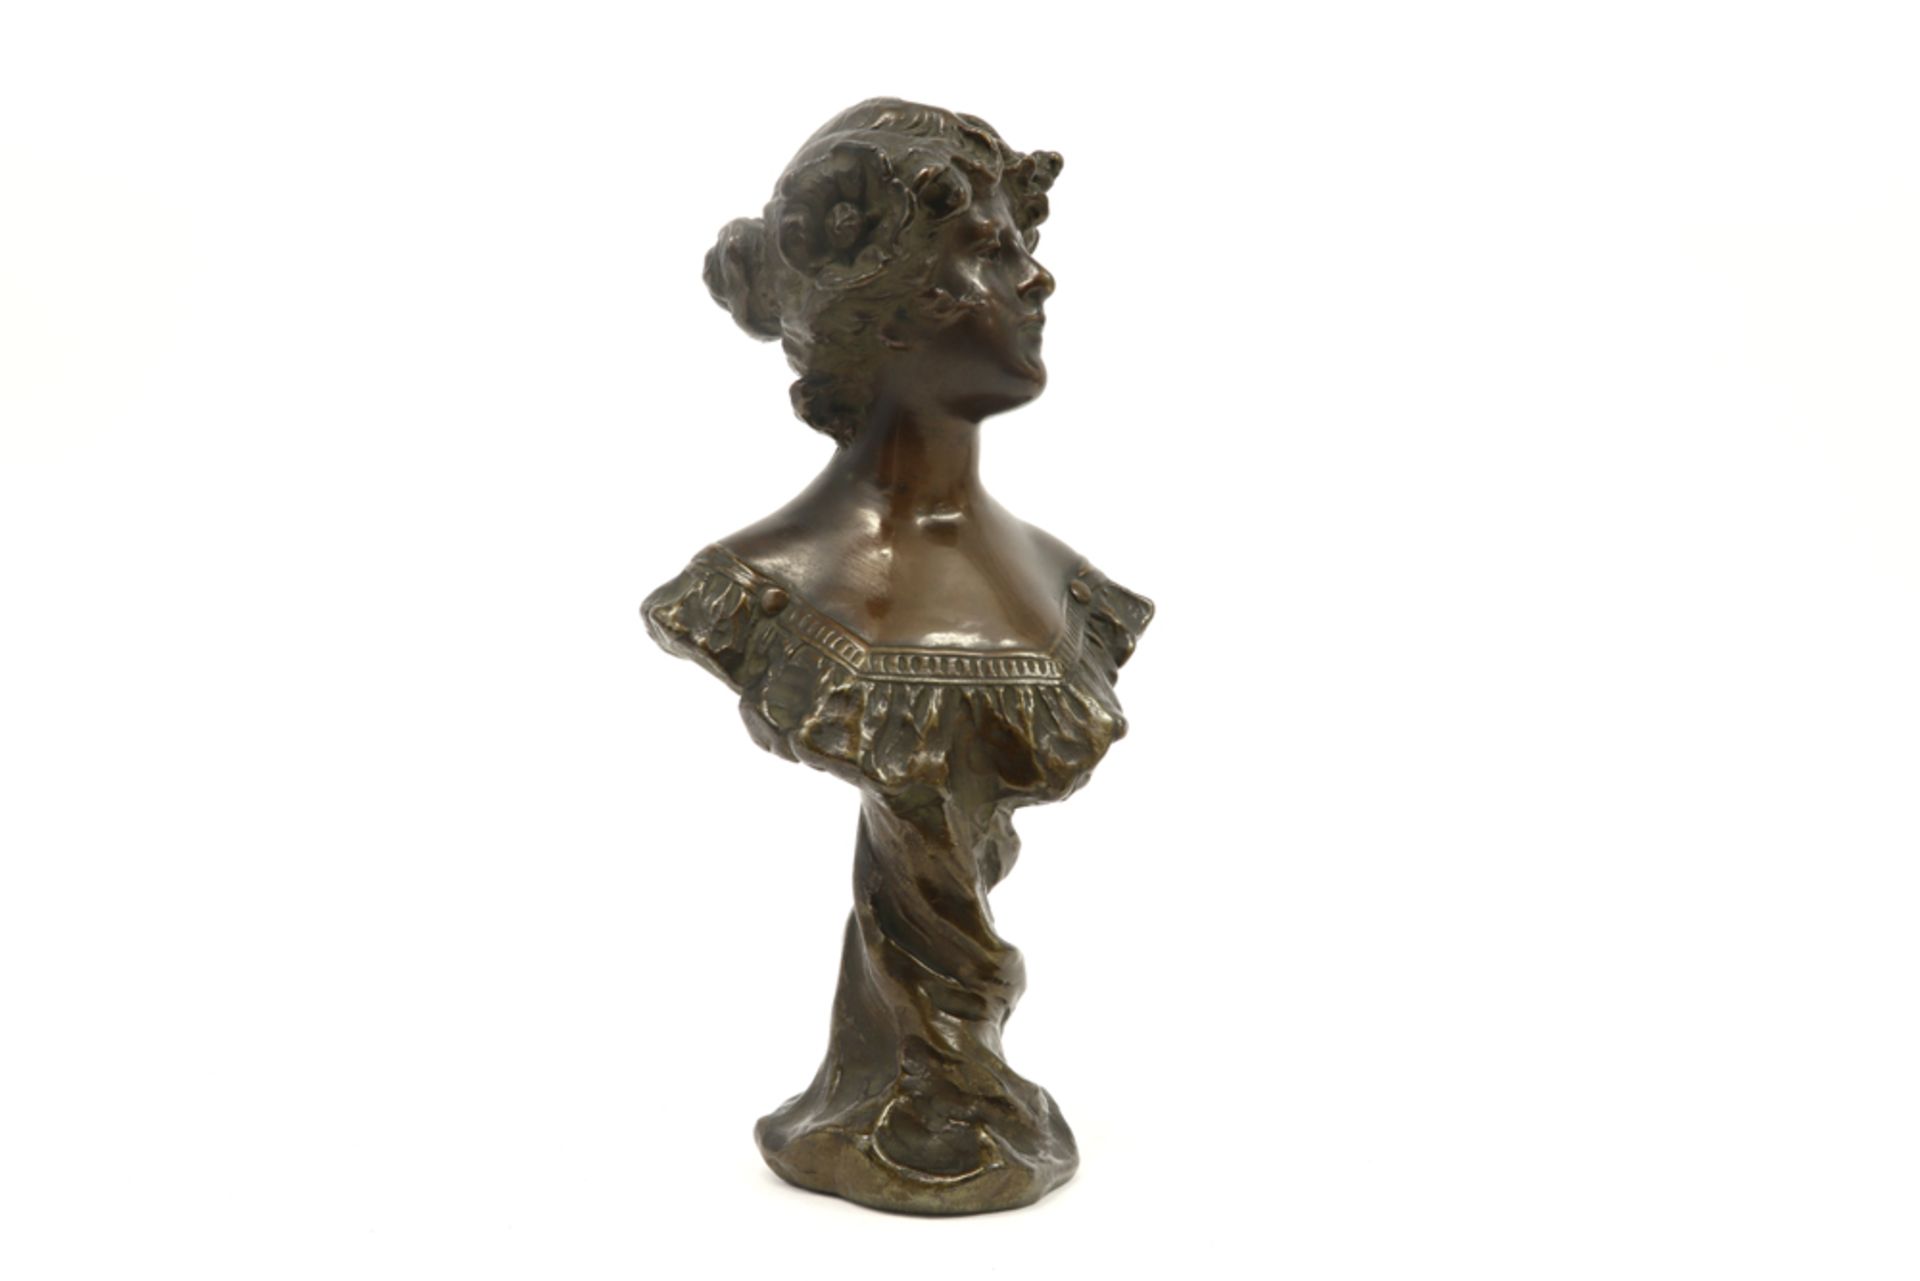 early 20th Cent. galvano-sculpture - signed Gustave Van Vaerenbergh and numbered||VAN VAERENBERGH